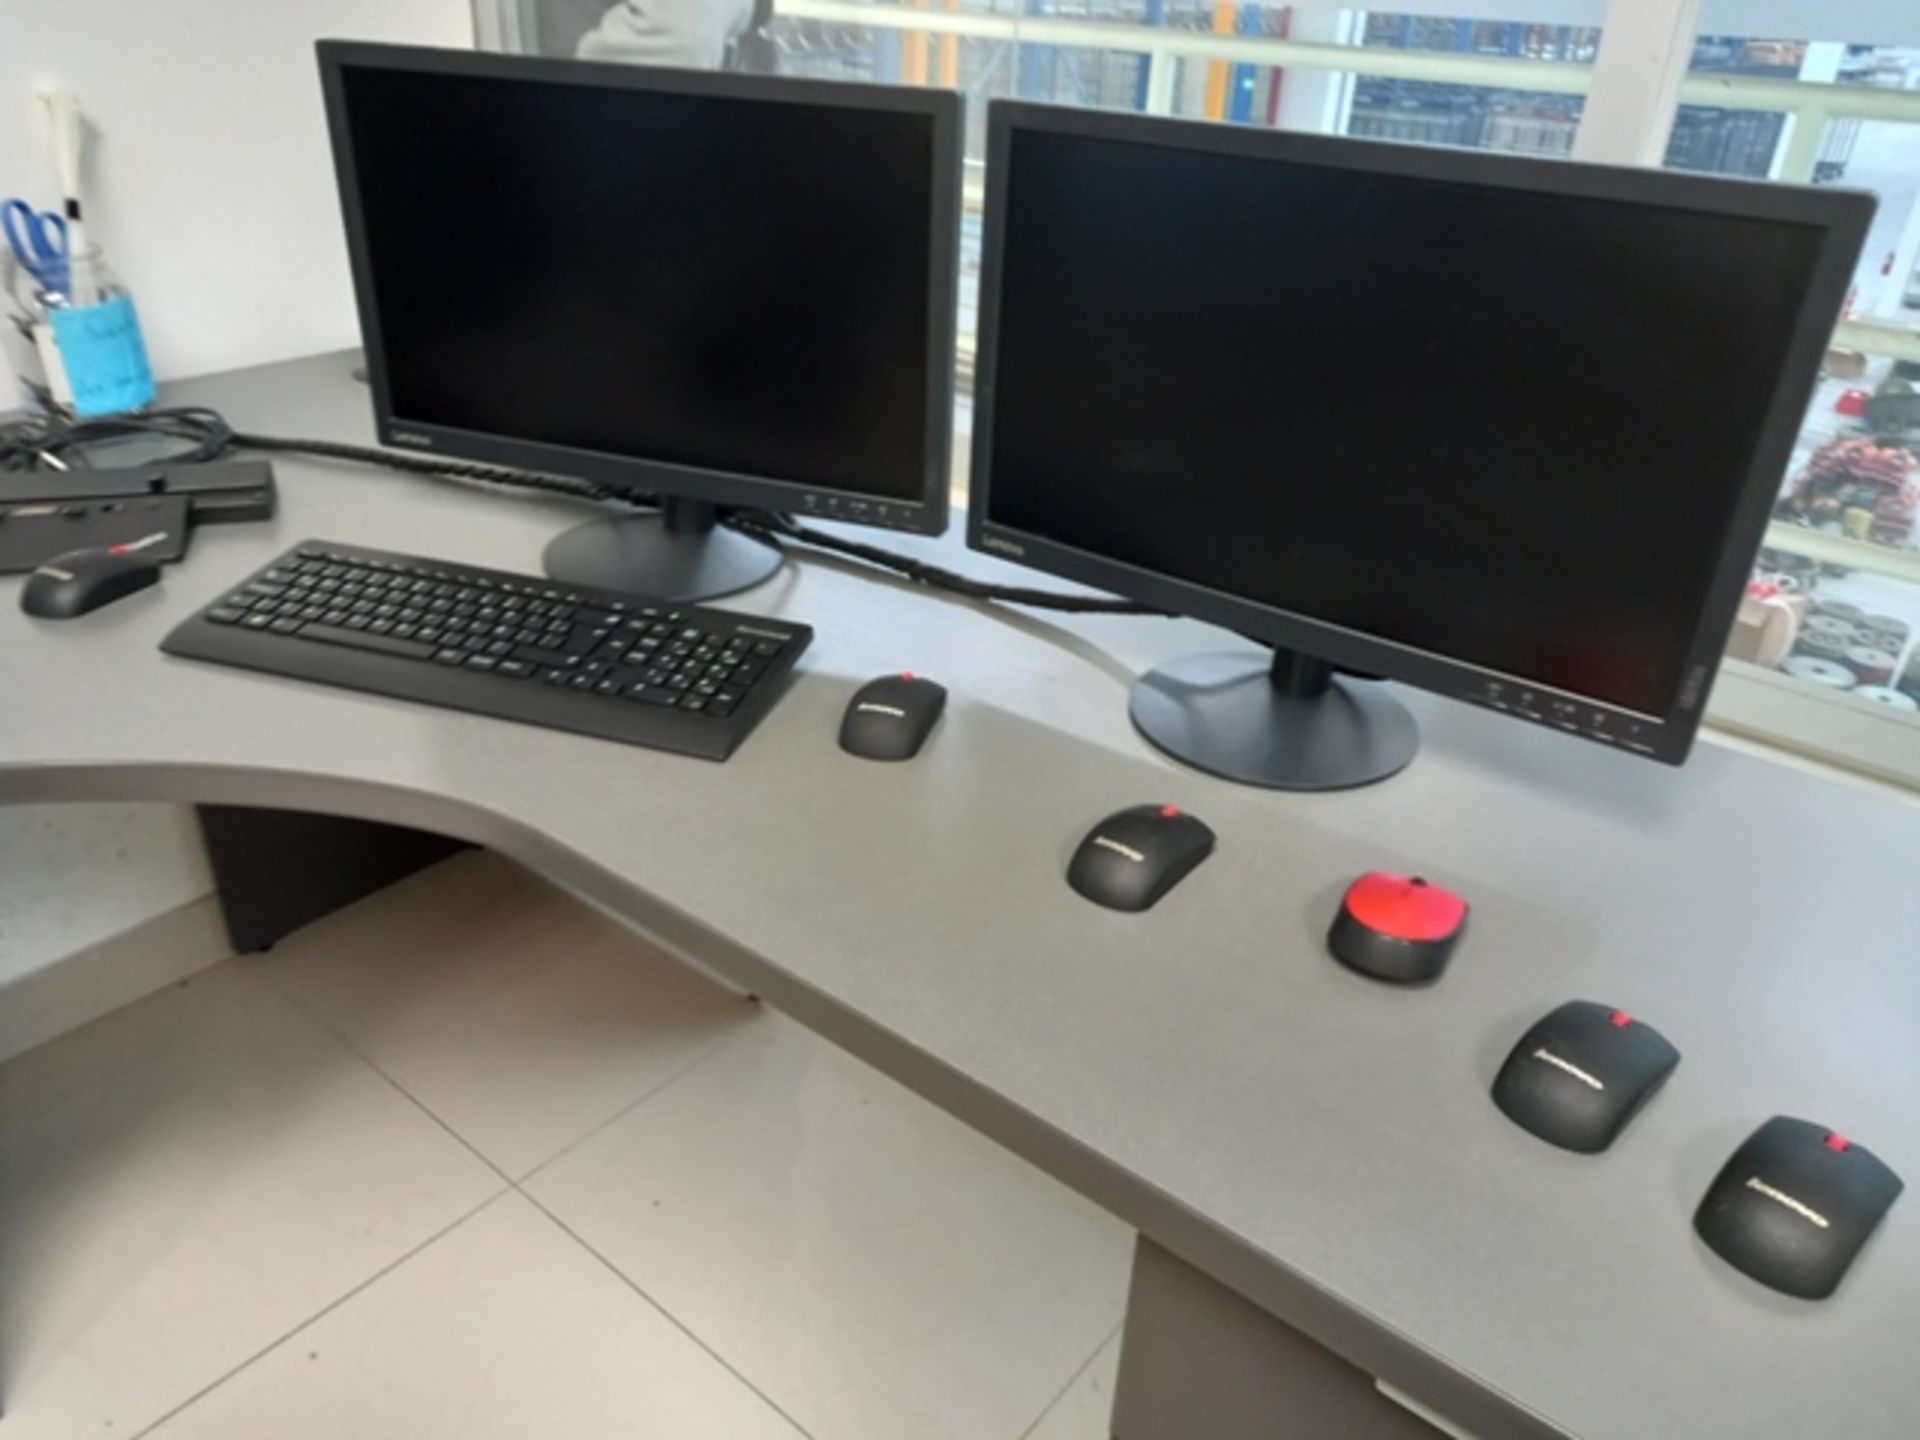 (29) Pcs Office Furniture and Computer Equipment Consisting of: (2) 2 Person Work Stations and more - Image 5 of 33